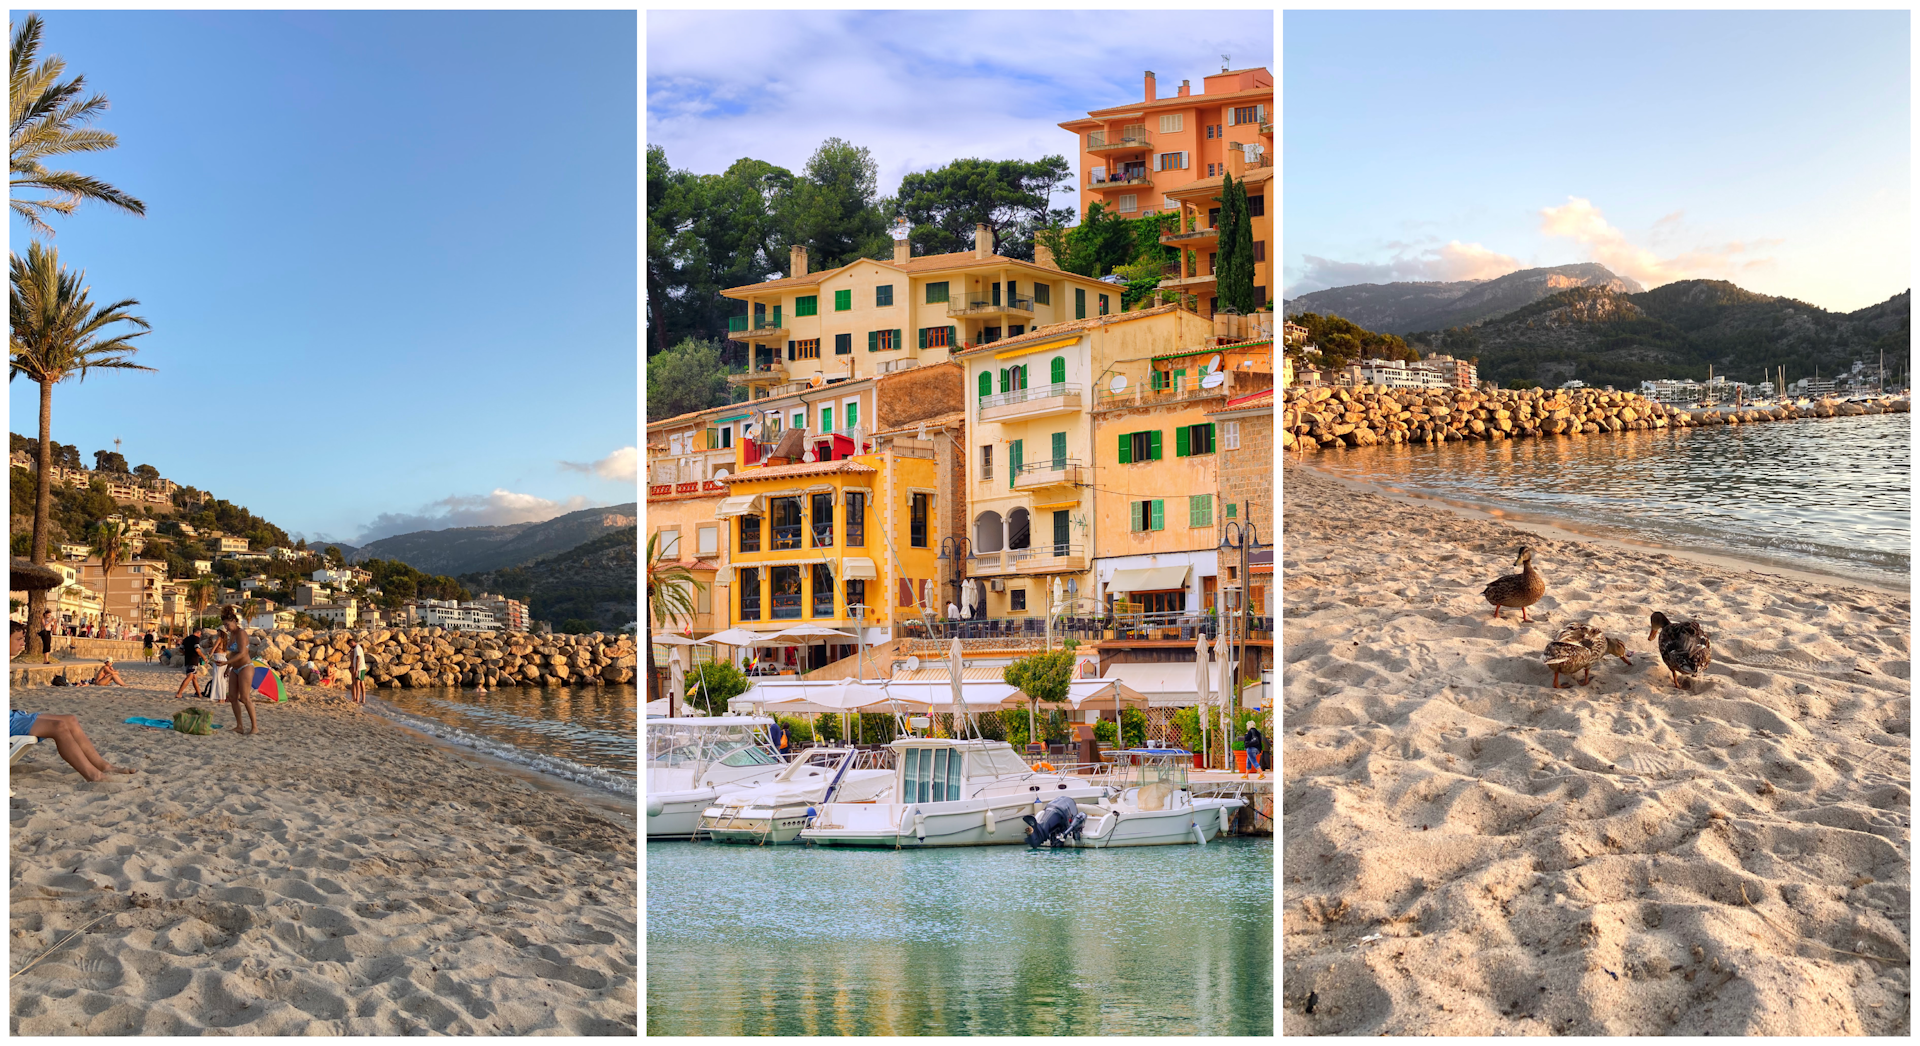 Images of Port de Soller beach with boats docked by the harbor and people and ducks relaxing on the sand